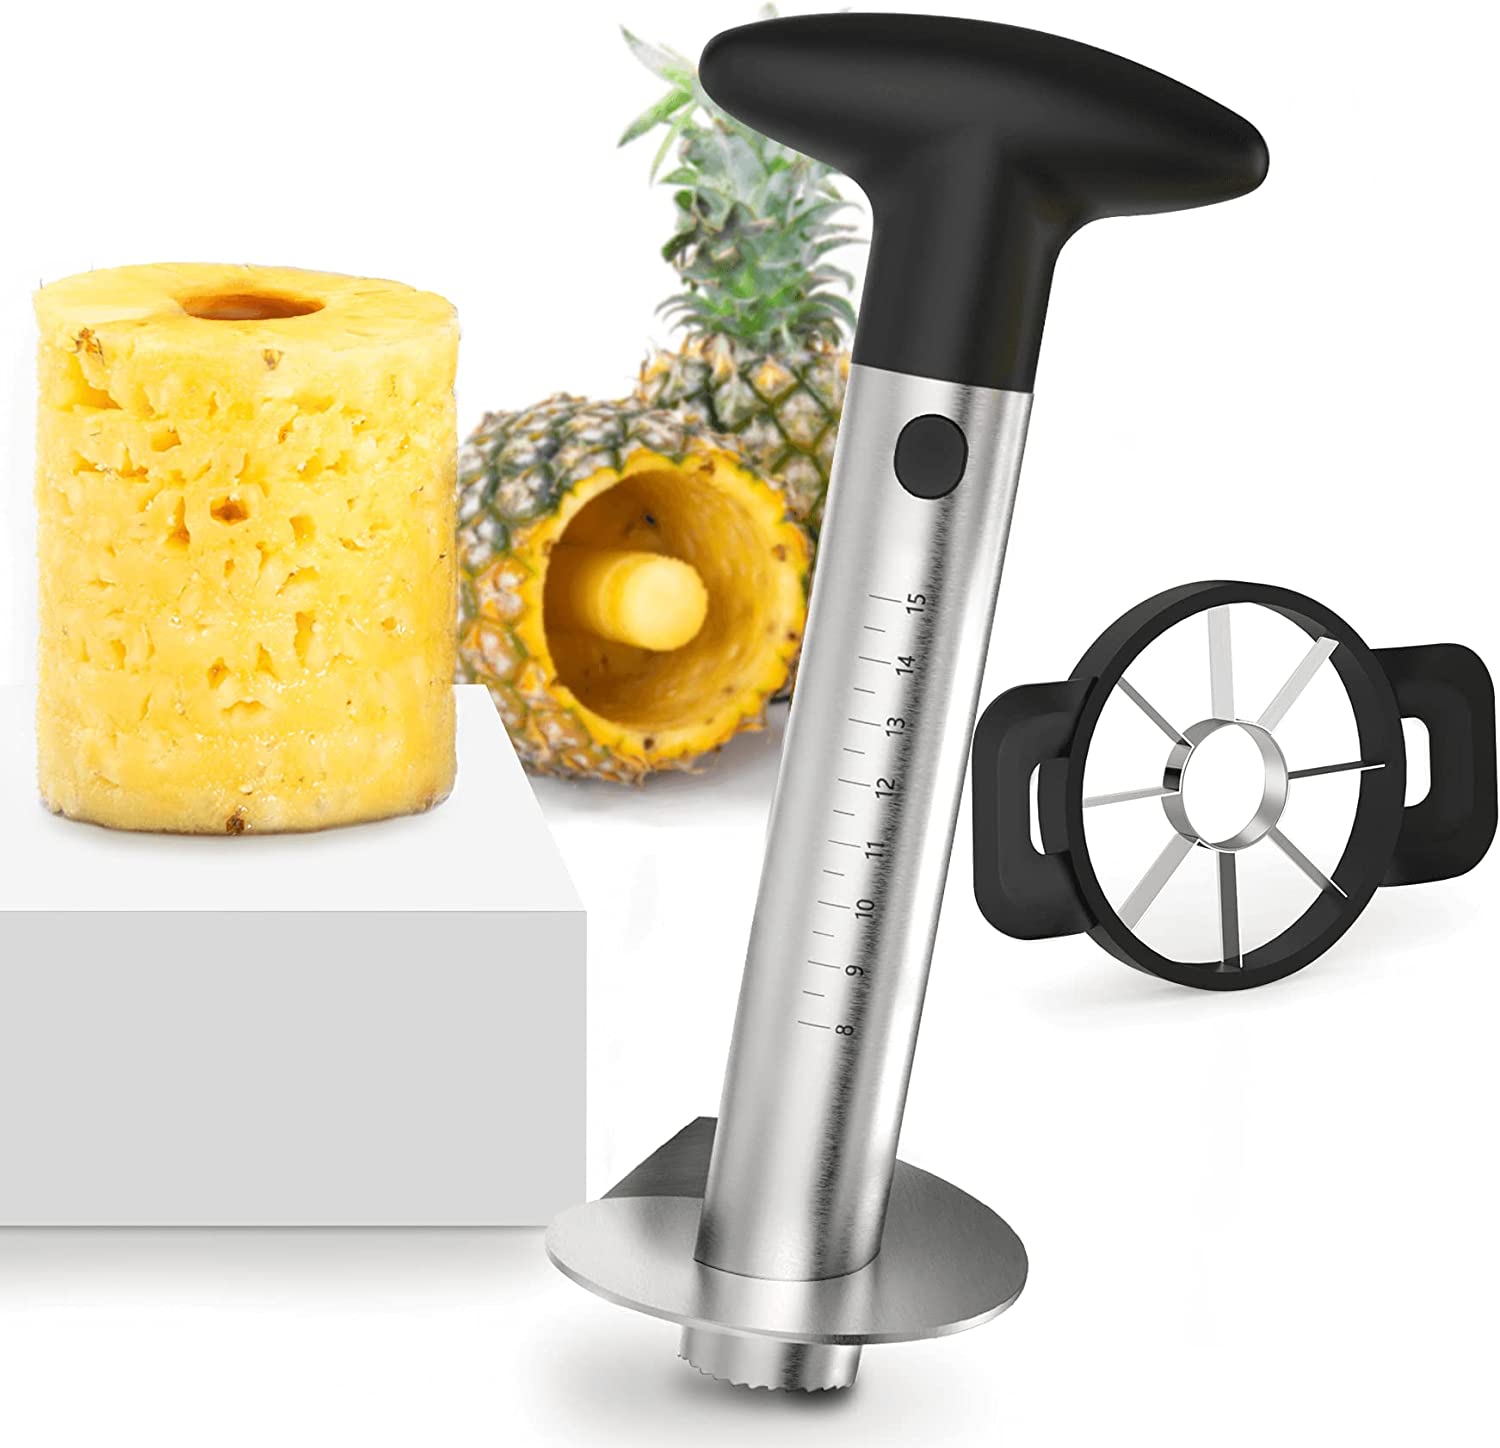 Pineapple Corer, [Upgraded, Reinforced, Thicker Blade] Newness Premium  Pineapple Corer Remover (Black)